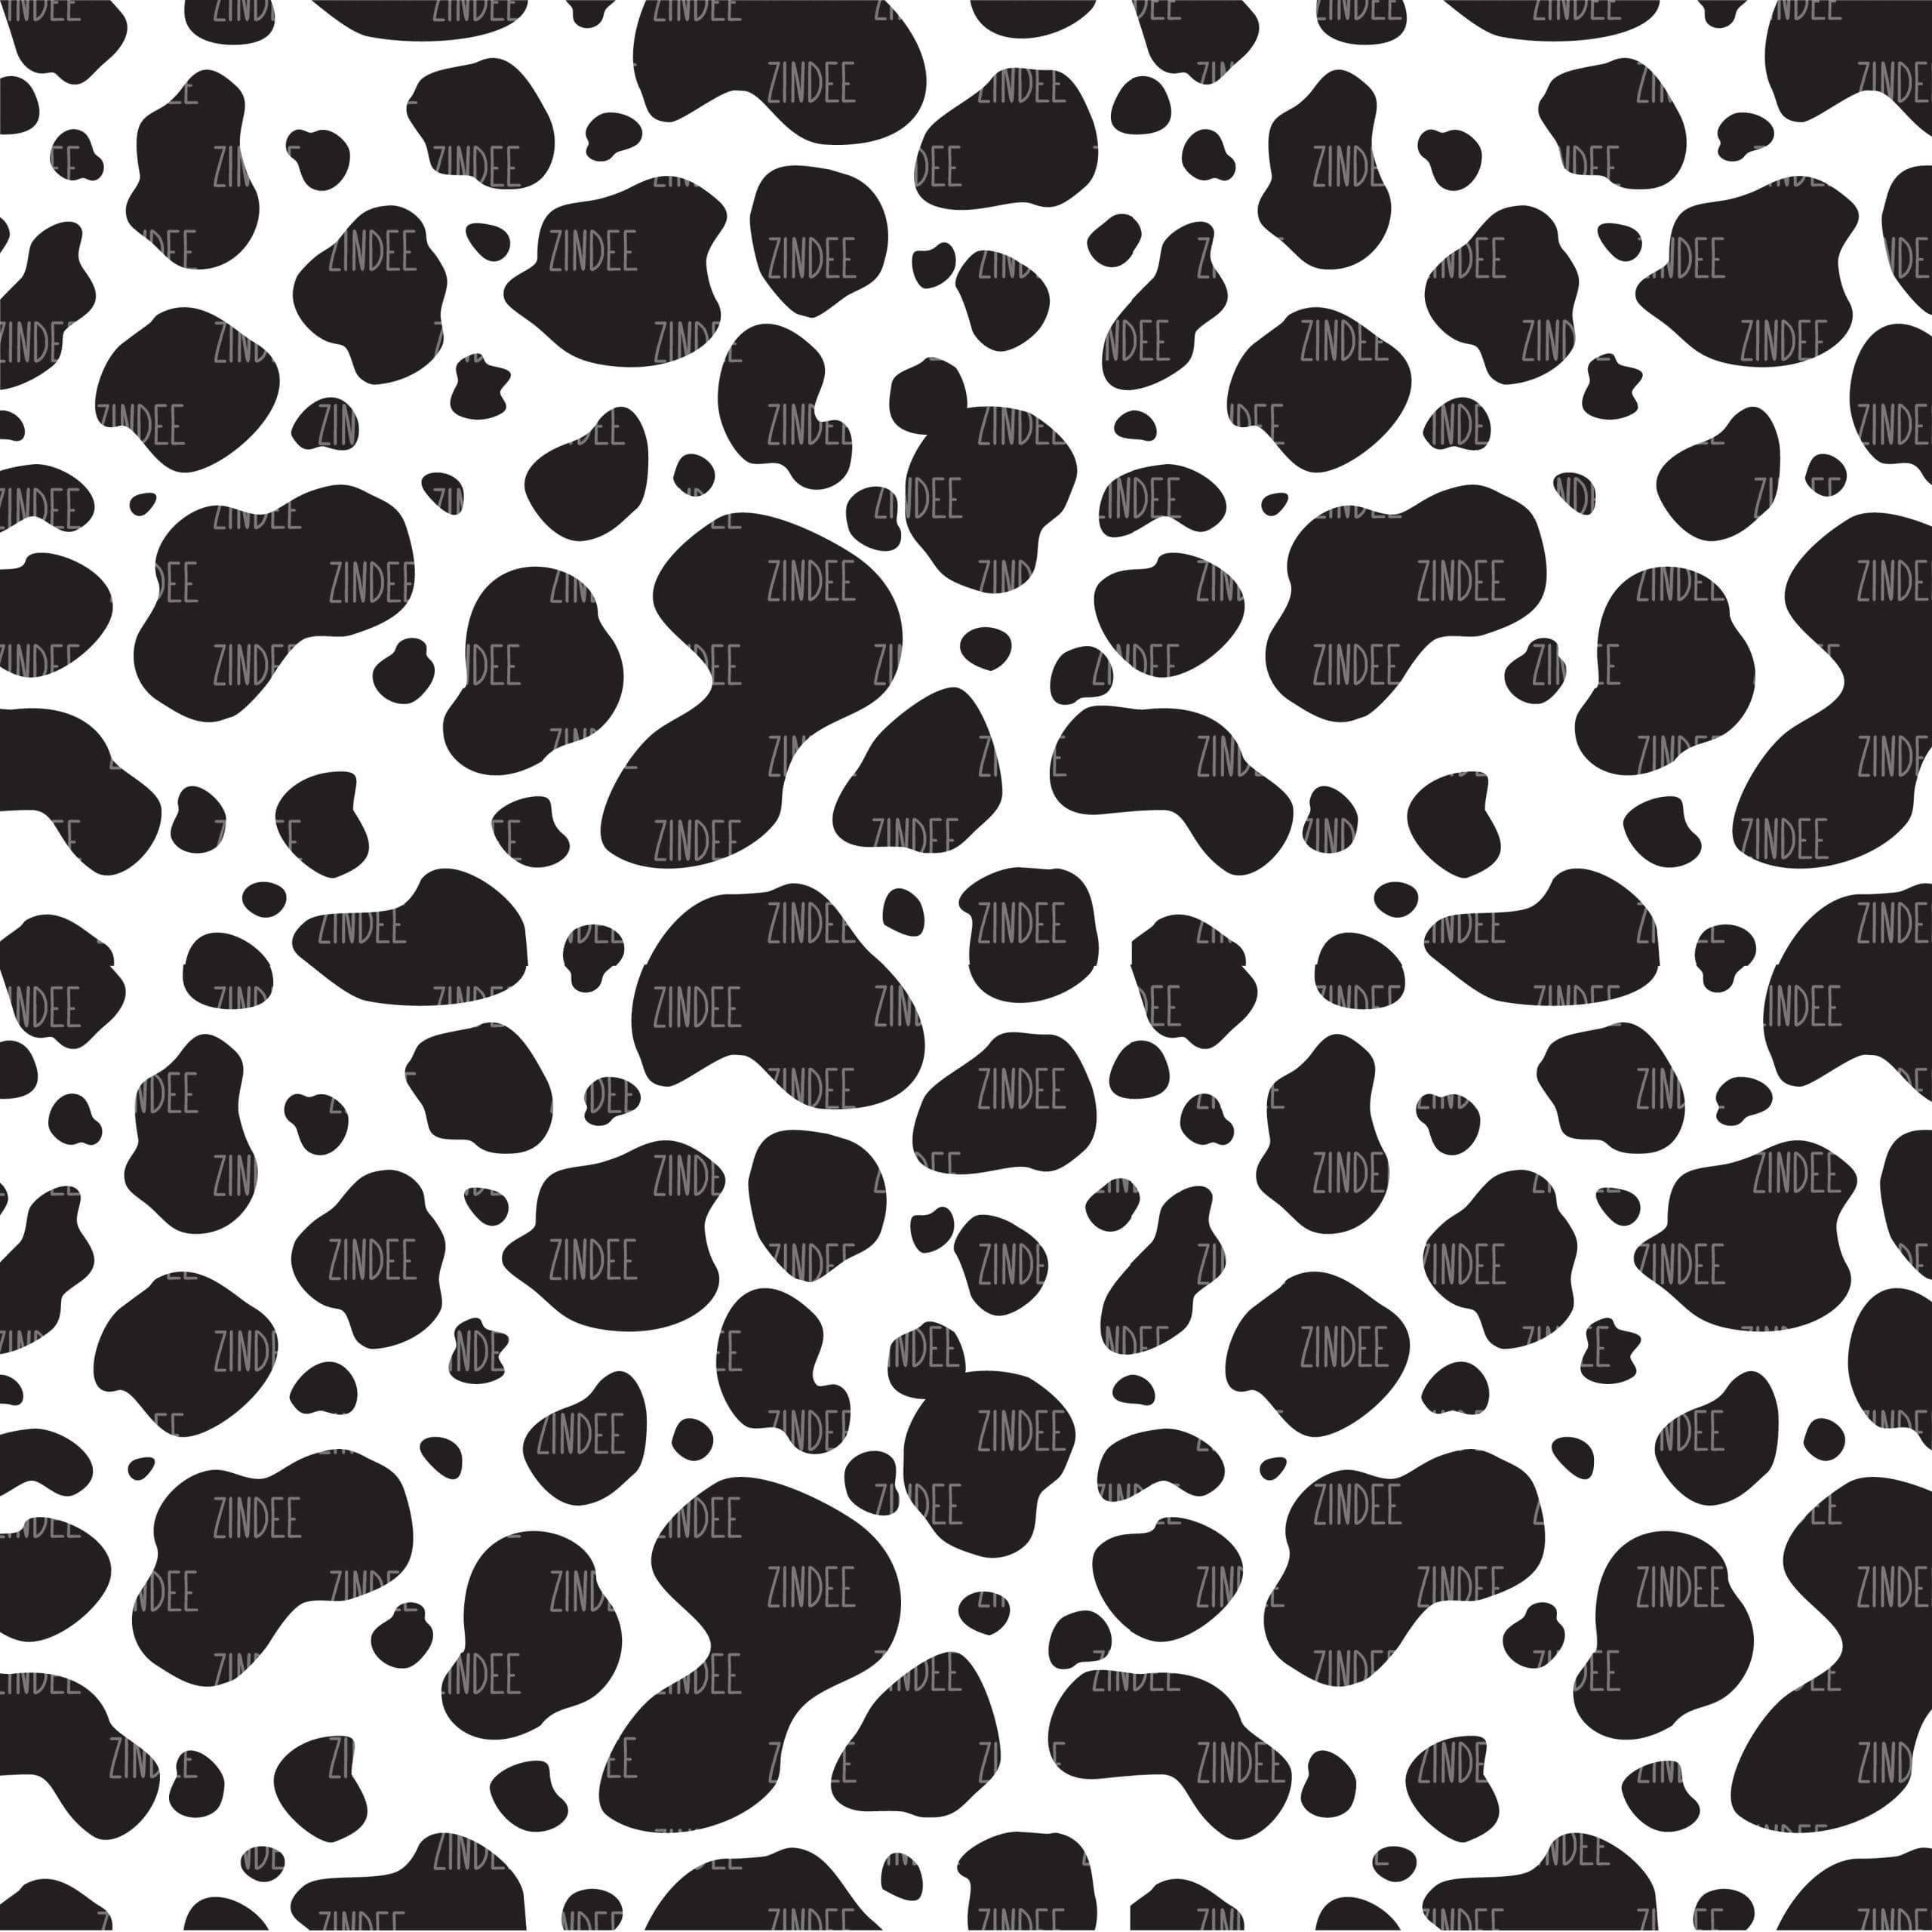 Black and White Cow Pattern Vinyl Small 12 x 12